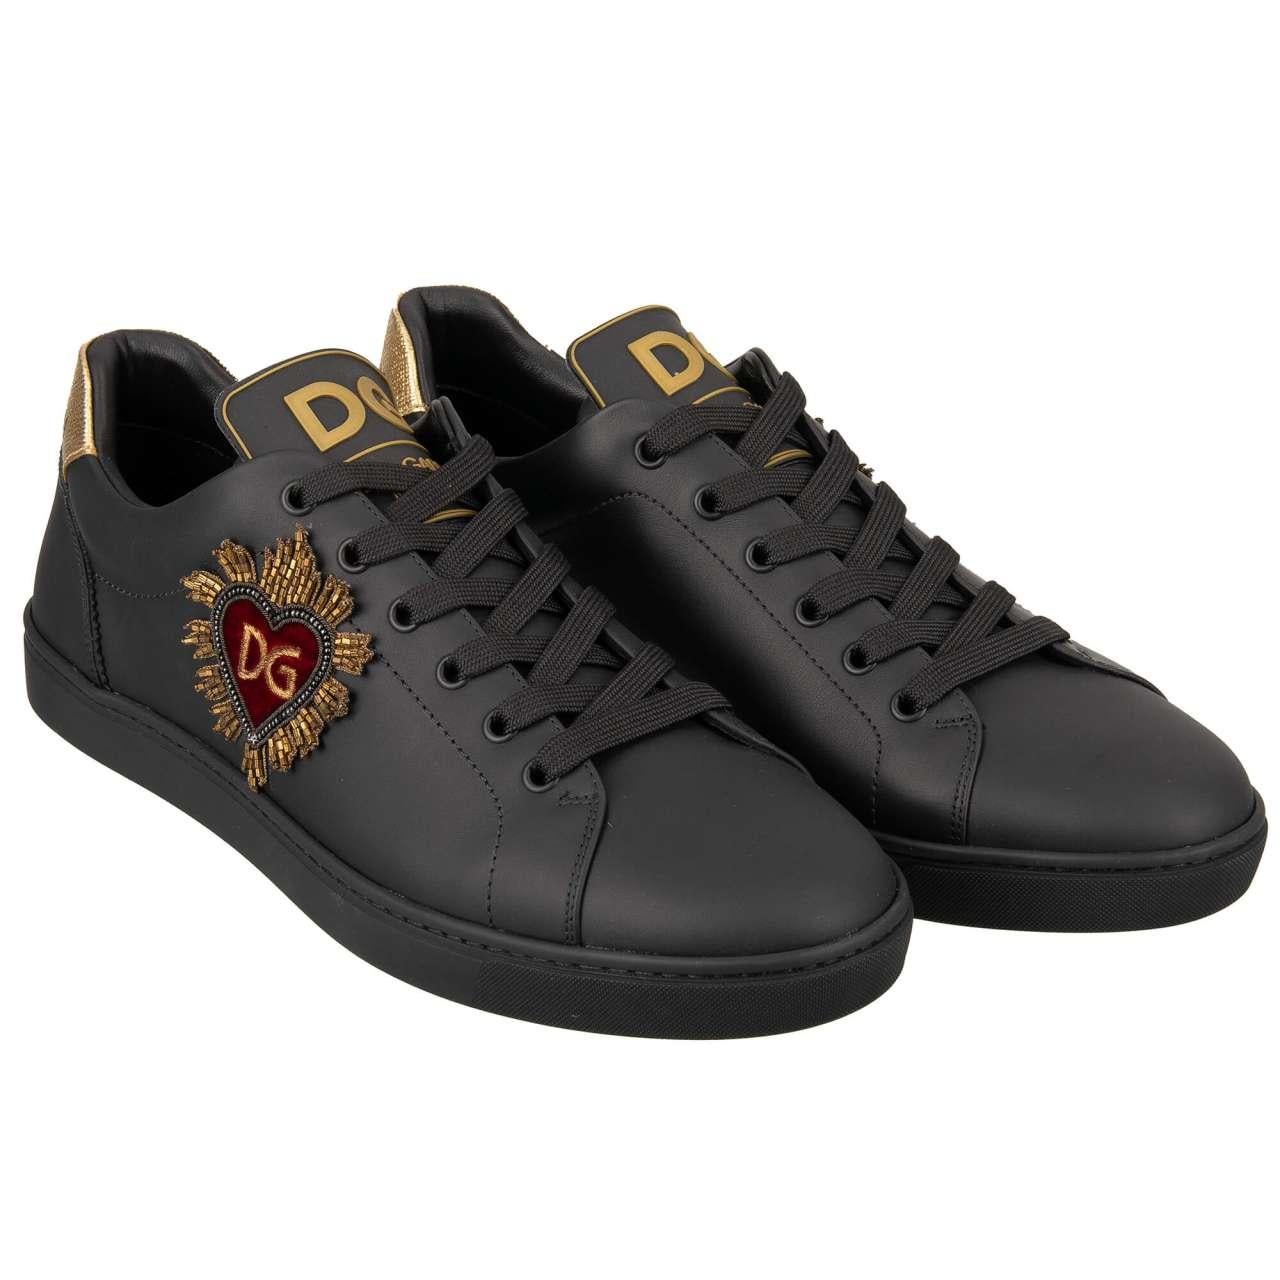 - Low-Top Sneaker LONDON with logo and heart logo embroidery in gold and black by DOLCE & GABBANA - New with Box - Former RRP: EUR 545 - MADE IN ITALY - Model: CS1640-B5545-8E831 - Material: 100% Calfskin - Sole: Rubber - Color: Black / Gold -